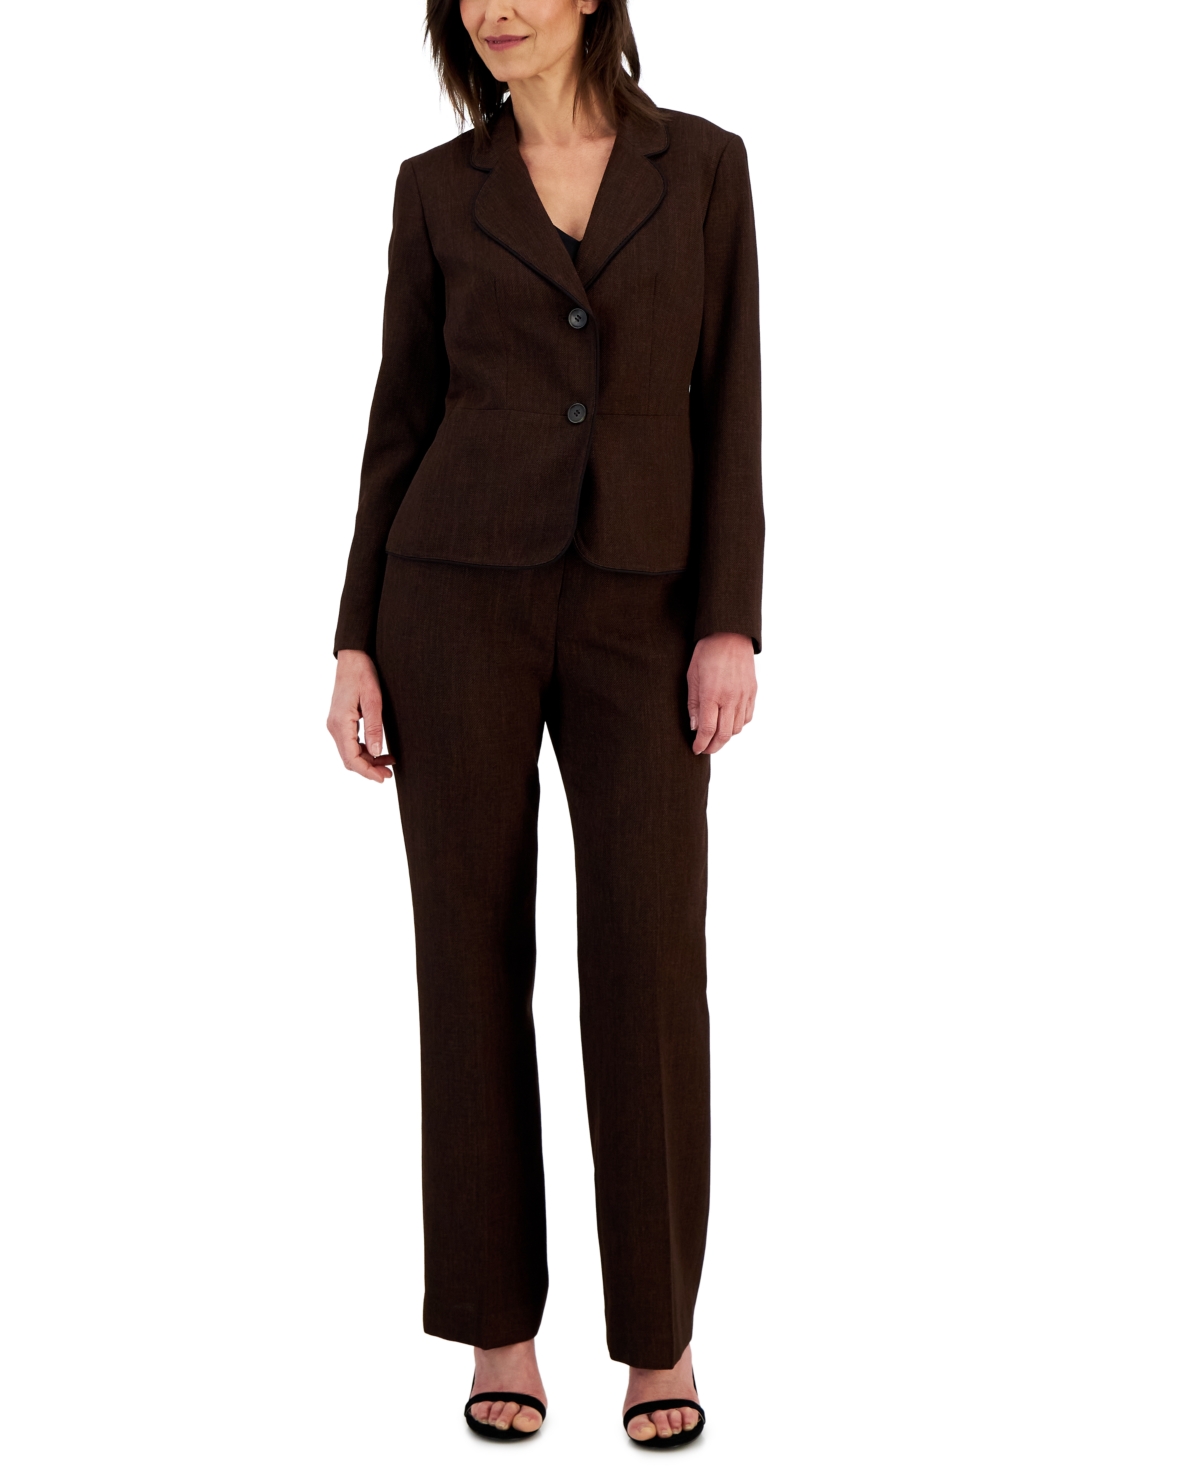 Le Suit Women's Framed Twill Two-button Pantsuit, Regular And Petite Sizes In Summer Brown,black